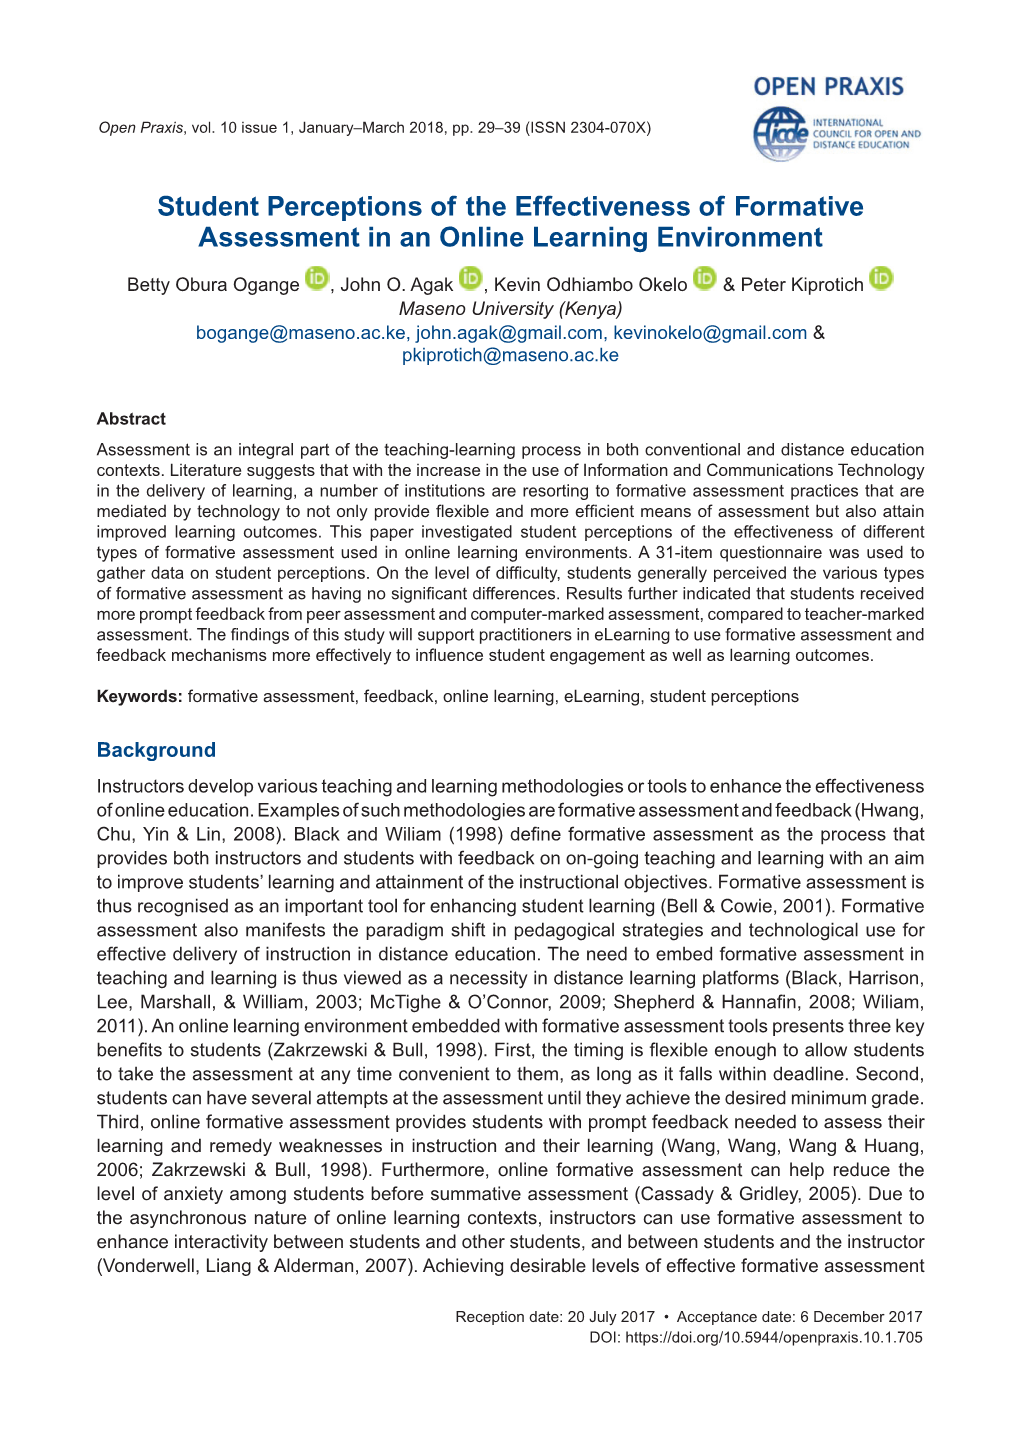 Student Perceptions of the Effectiveness of Formative Assessment in an Online Learning Environment